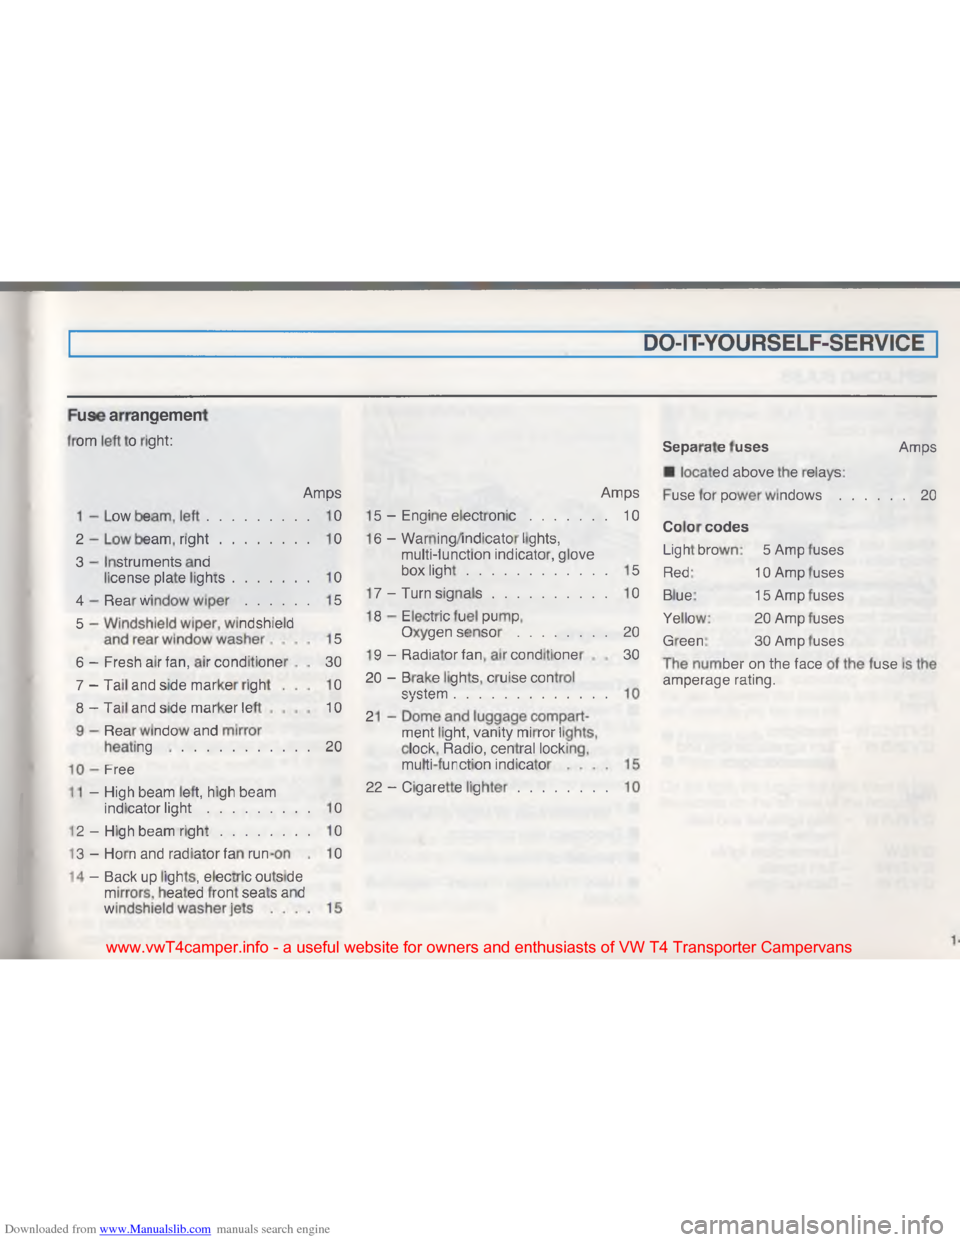 VOLKSWAGEN TRANSPORTER 1993 T4 / 4.G Owners Manual Downloaded from www.Manualslib.com manuals search engine *
##
#
;

"
\035
! #
#
\(
#
; \002
#
#
\007
L
#
\033
# , #
\002 \002
\002 \b
, \002
\002
\007
\(
#
#
\003
#
#
"
\003 \001
\007
\007
\(
# #
# \